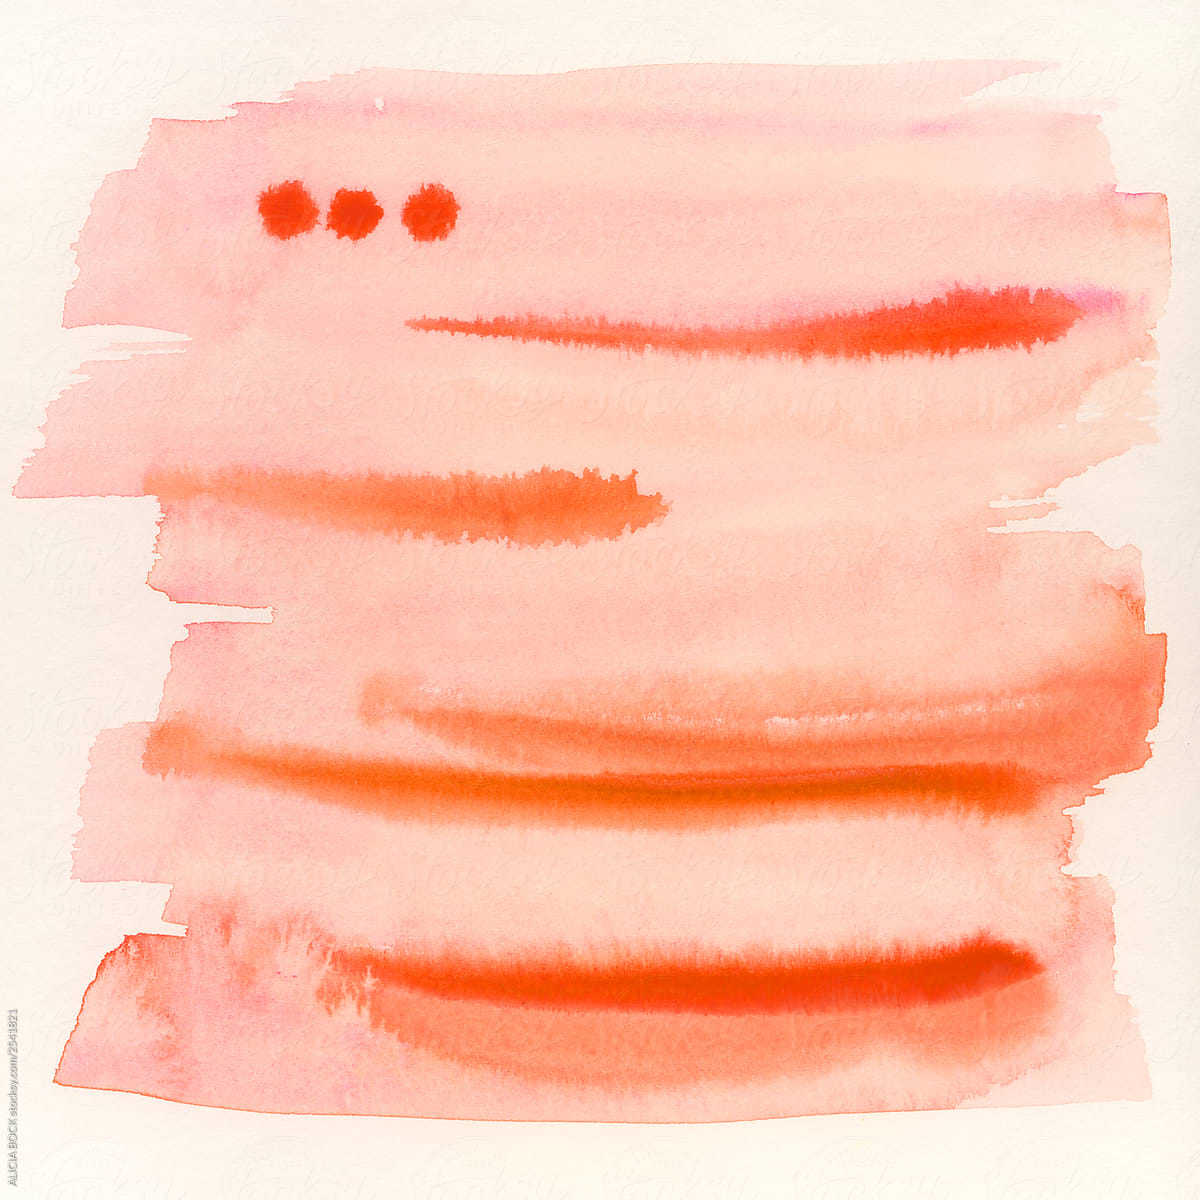 Watercolor Painting With Coral Stripes And Red Dots